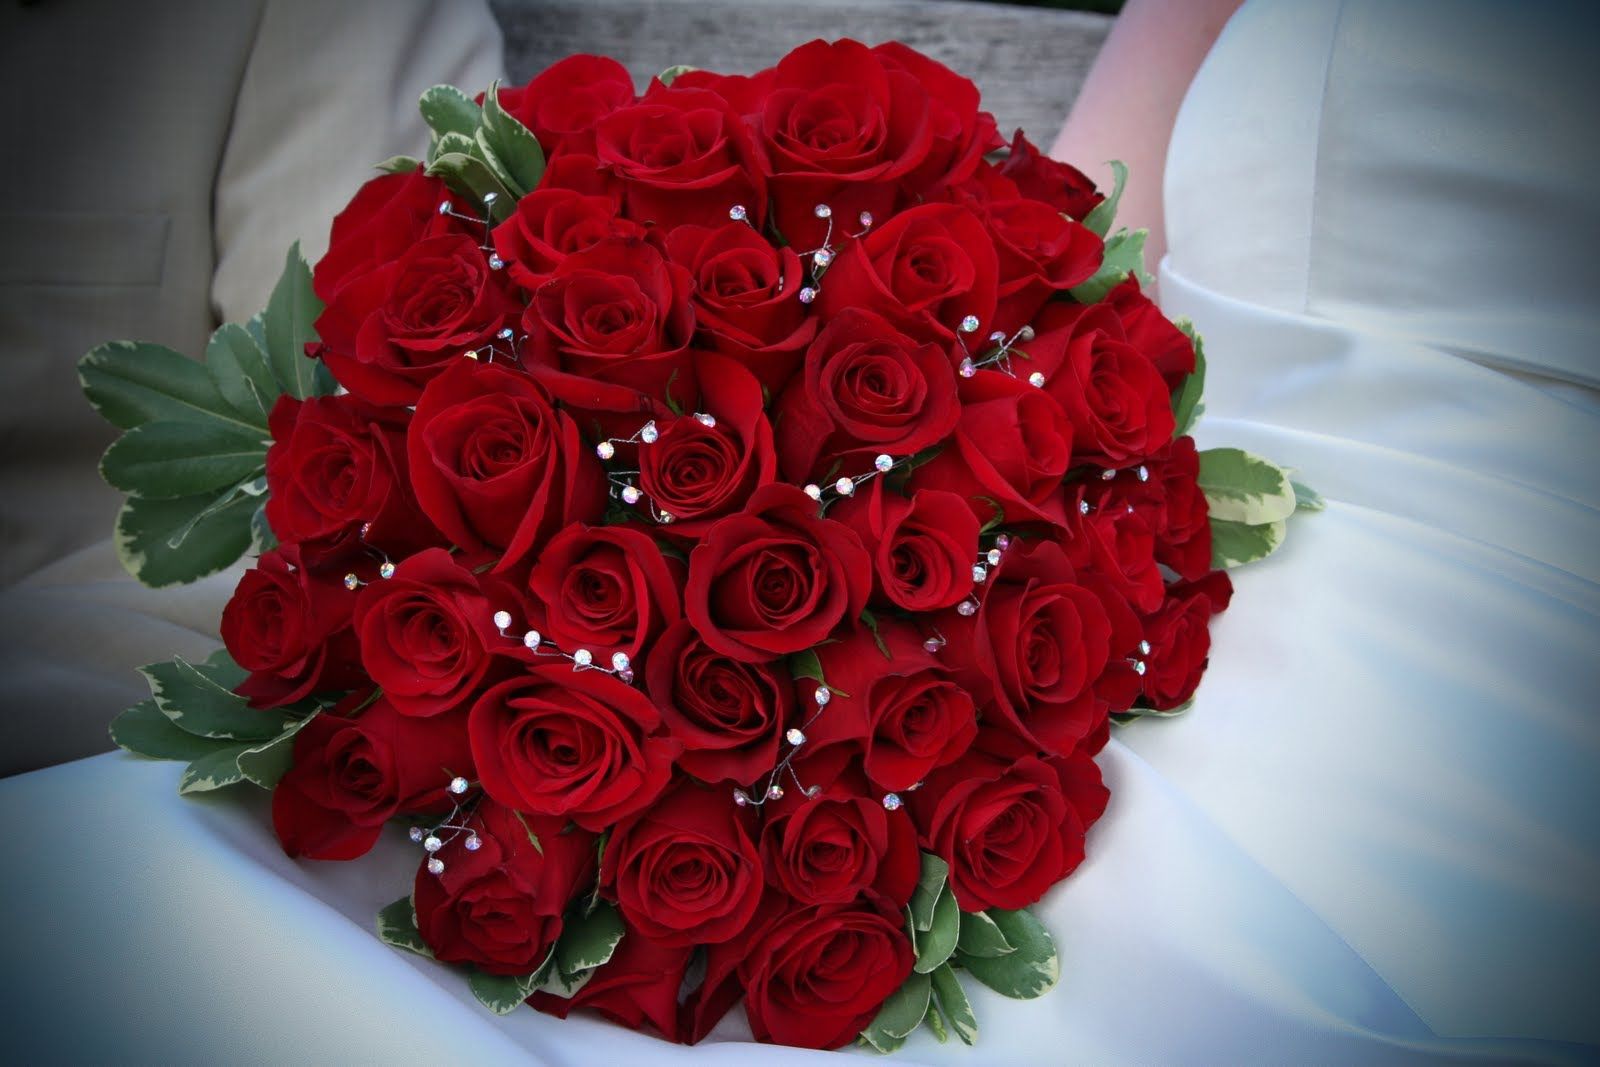 1600x1067 Most Beautiful Red Roses In The World - 1600x1067 Wallpaper on WallpaperBat